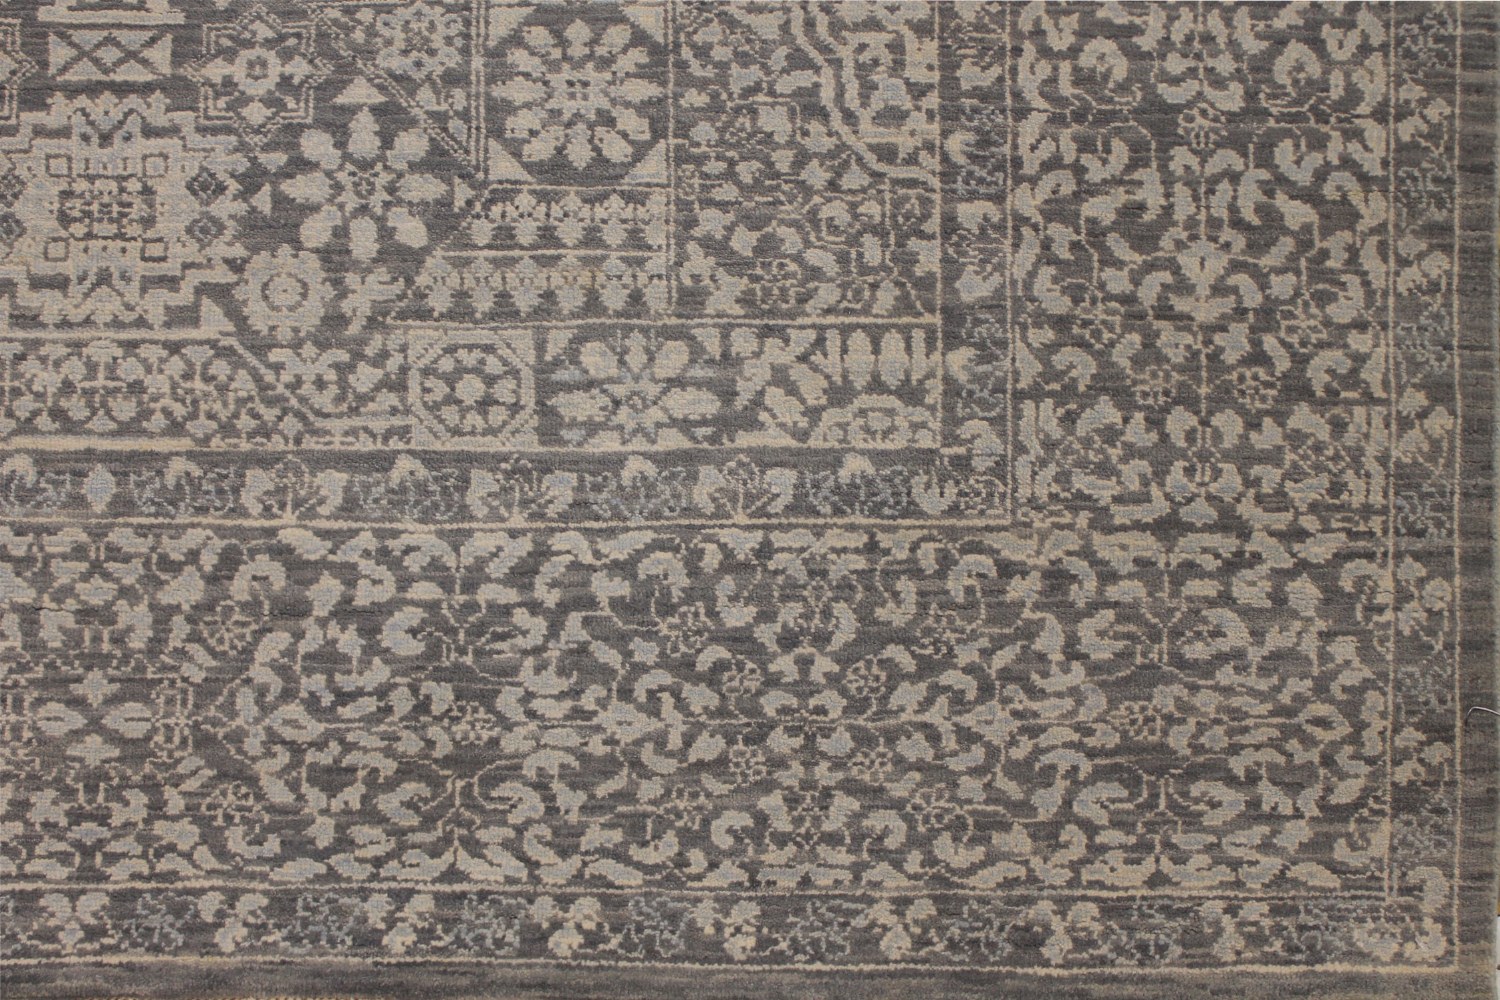 5x7/8 Aryana & Antique Revivals Hand Knotted Wool Area Rug - MR027457